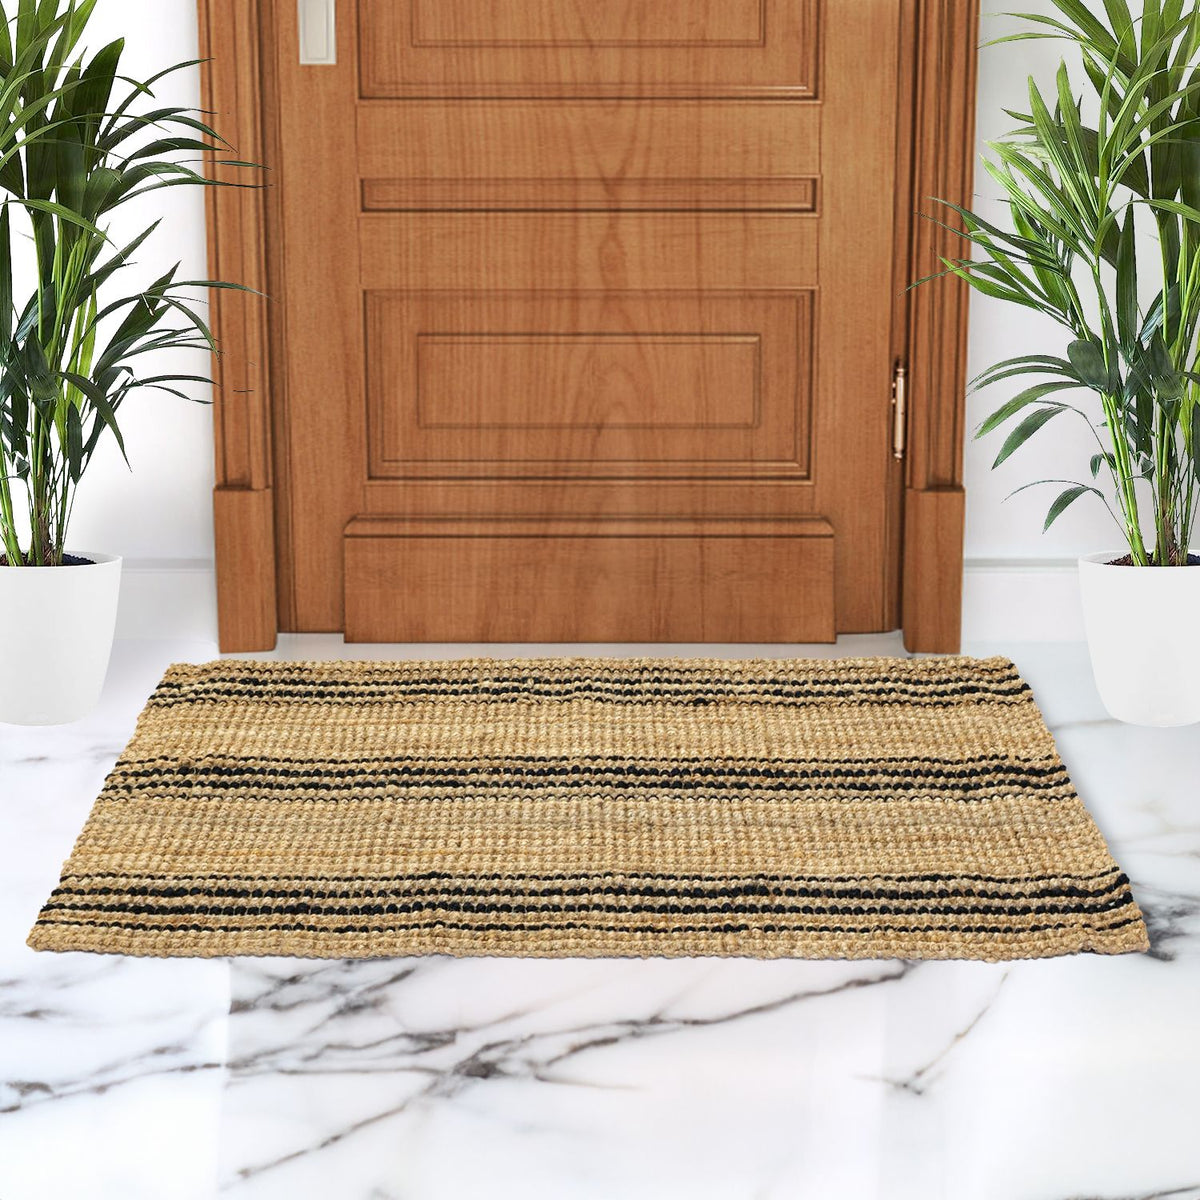 OnlyMat Lines of Life - Artisan Luxe Rug - Handwoven Jute Carpet - Organic Natural Sustainable